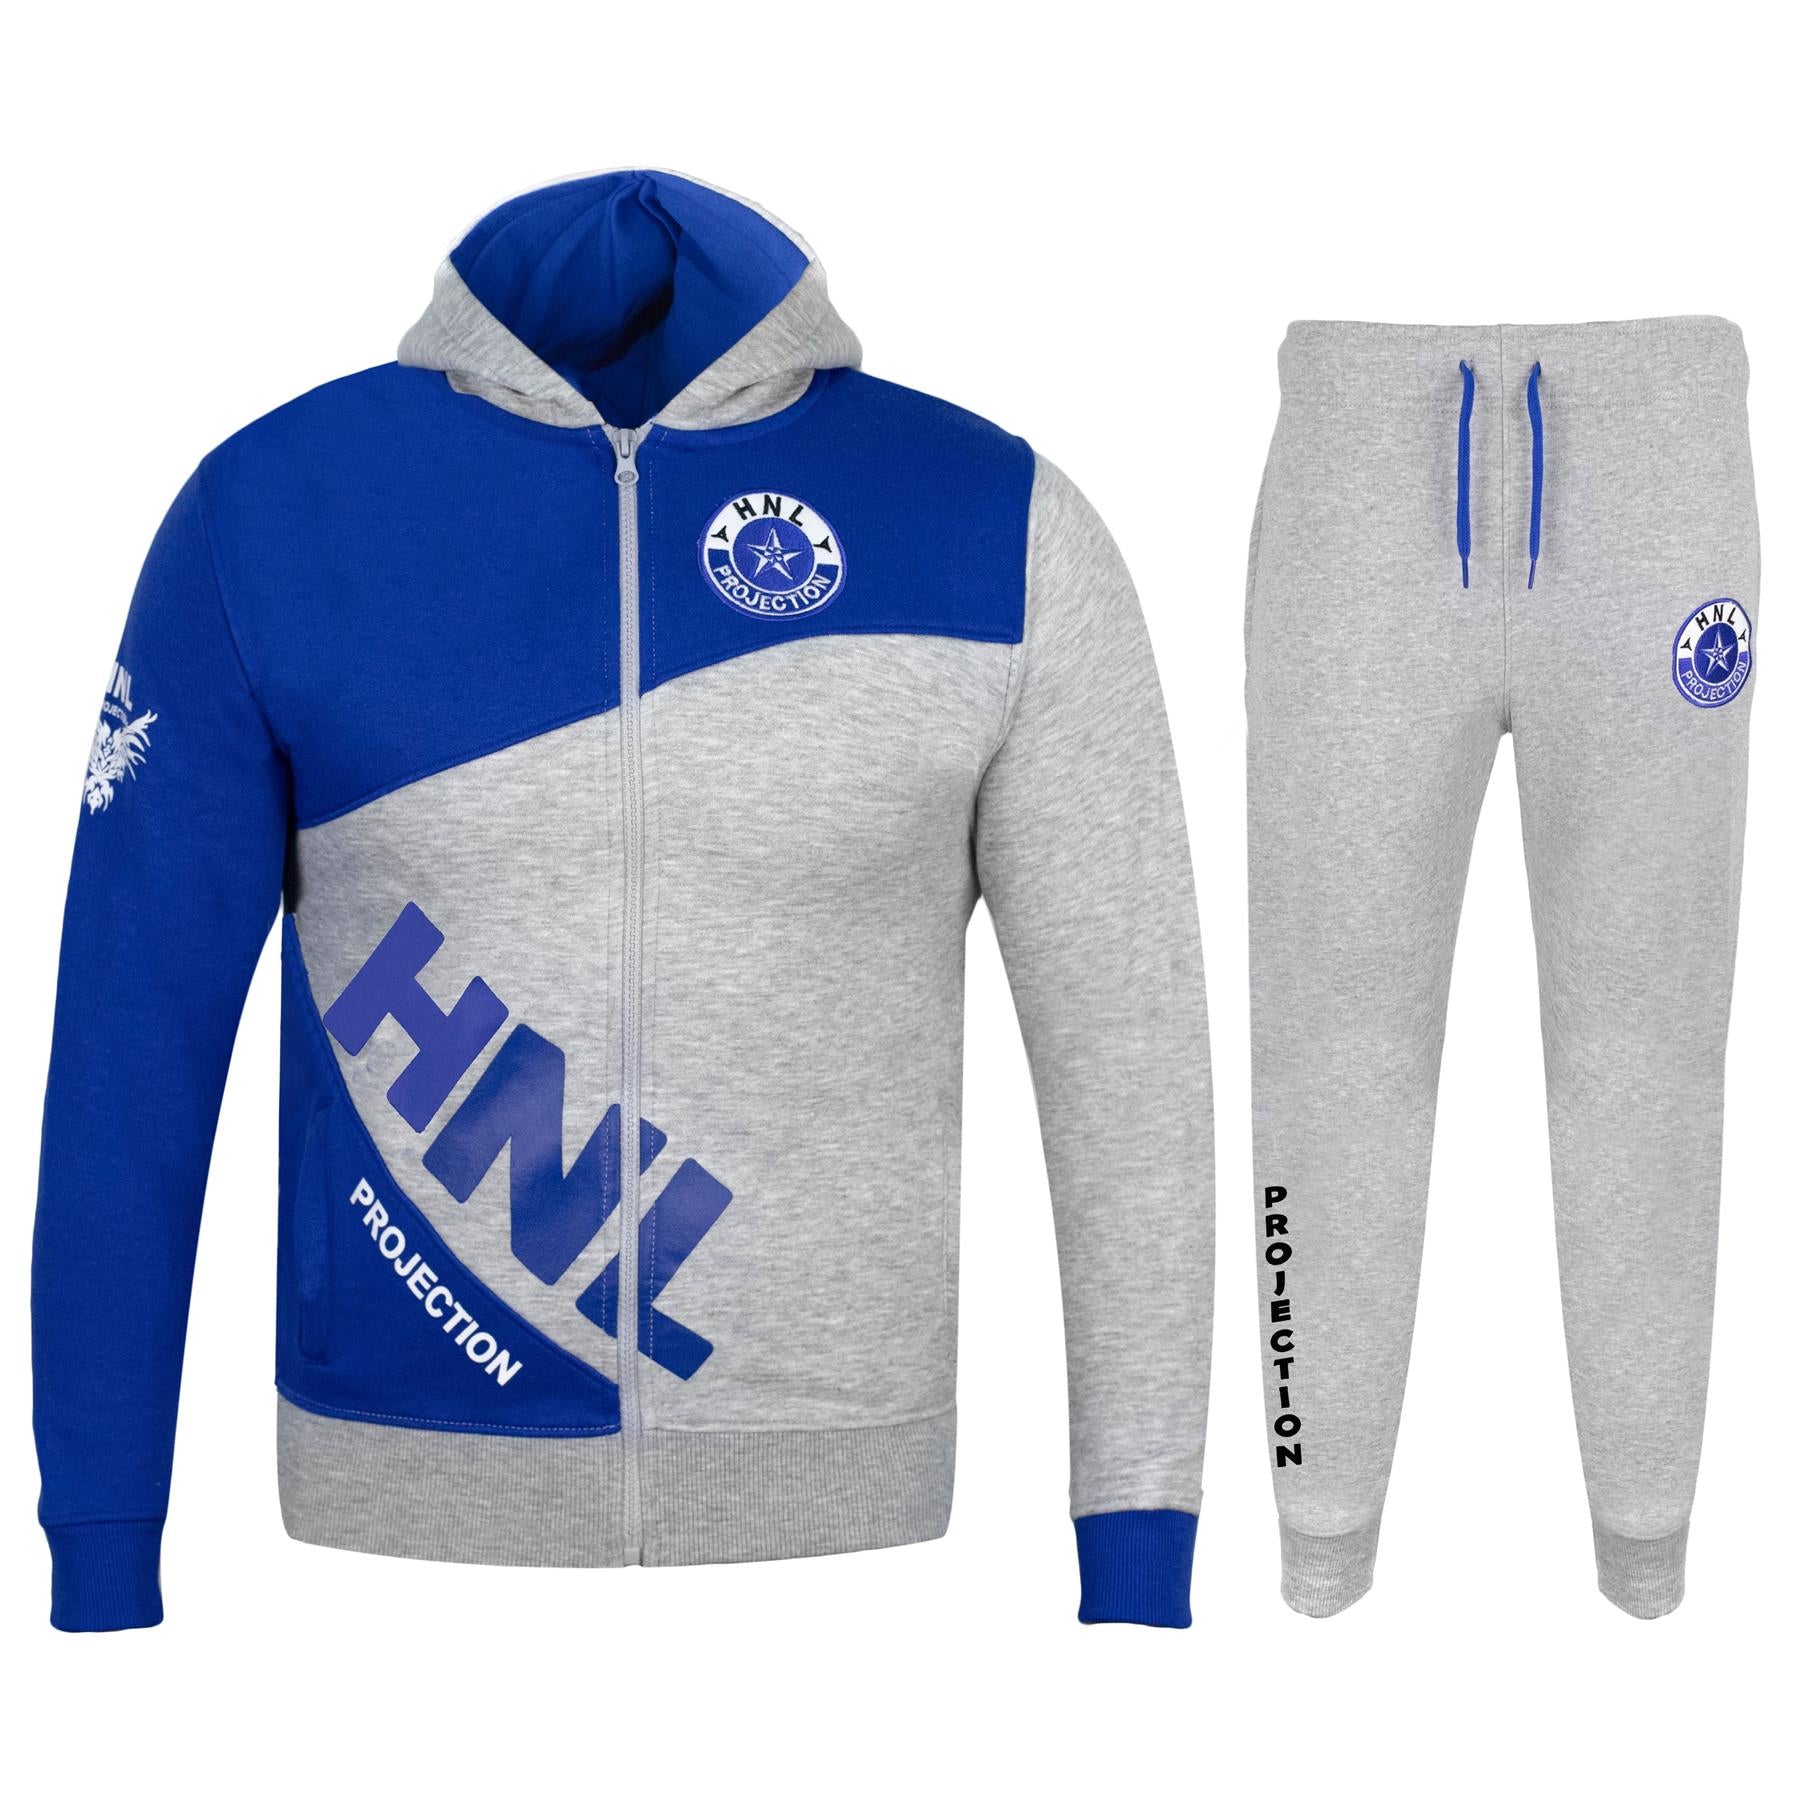 Kids Boys Girls HNL Tracksuit Hoodie With Bottom Joggers Jogging Suit